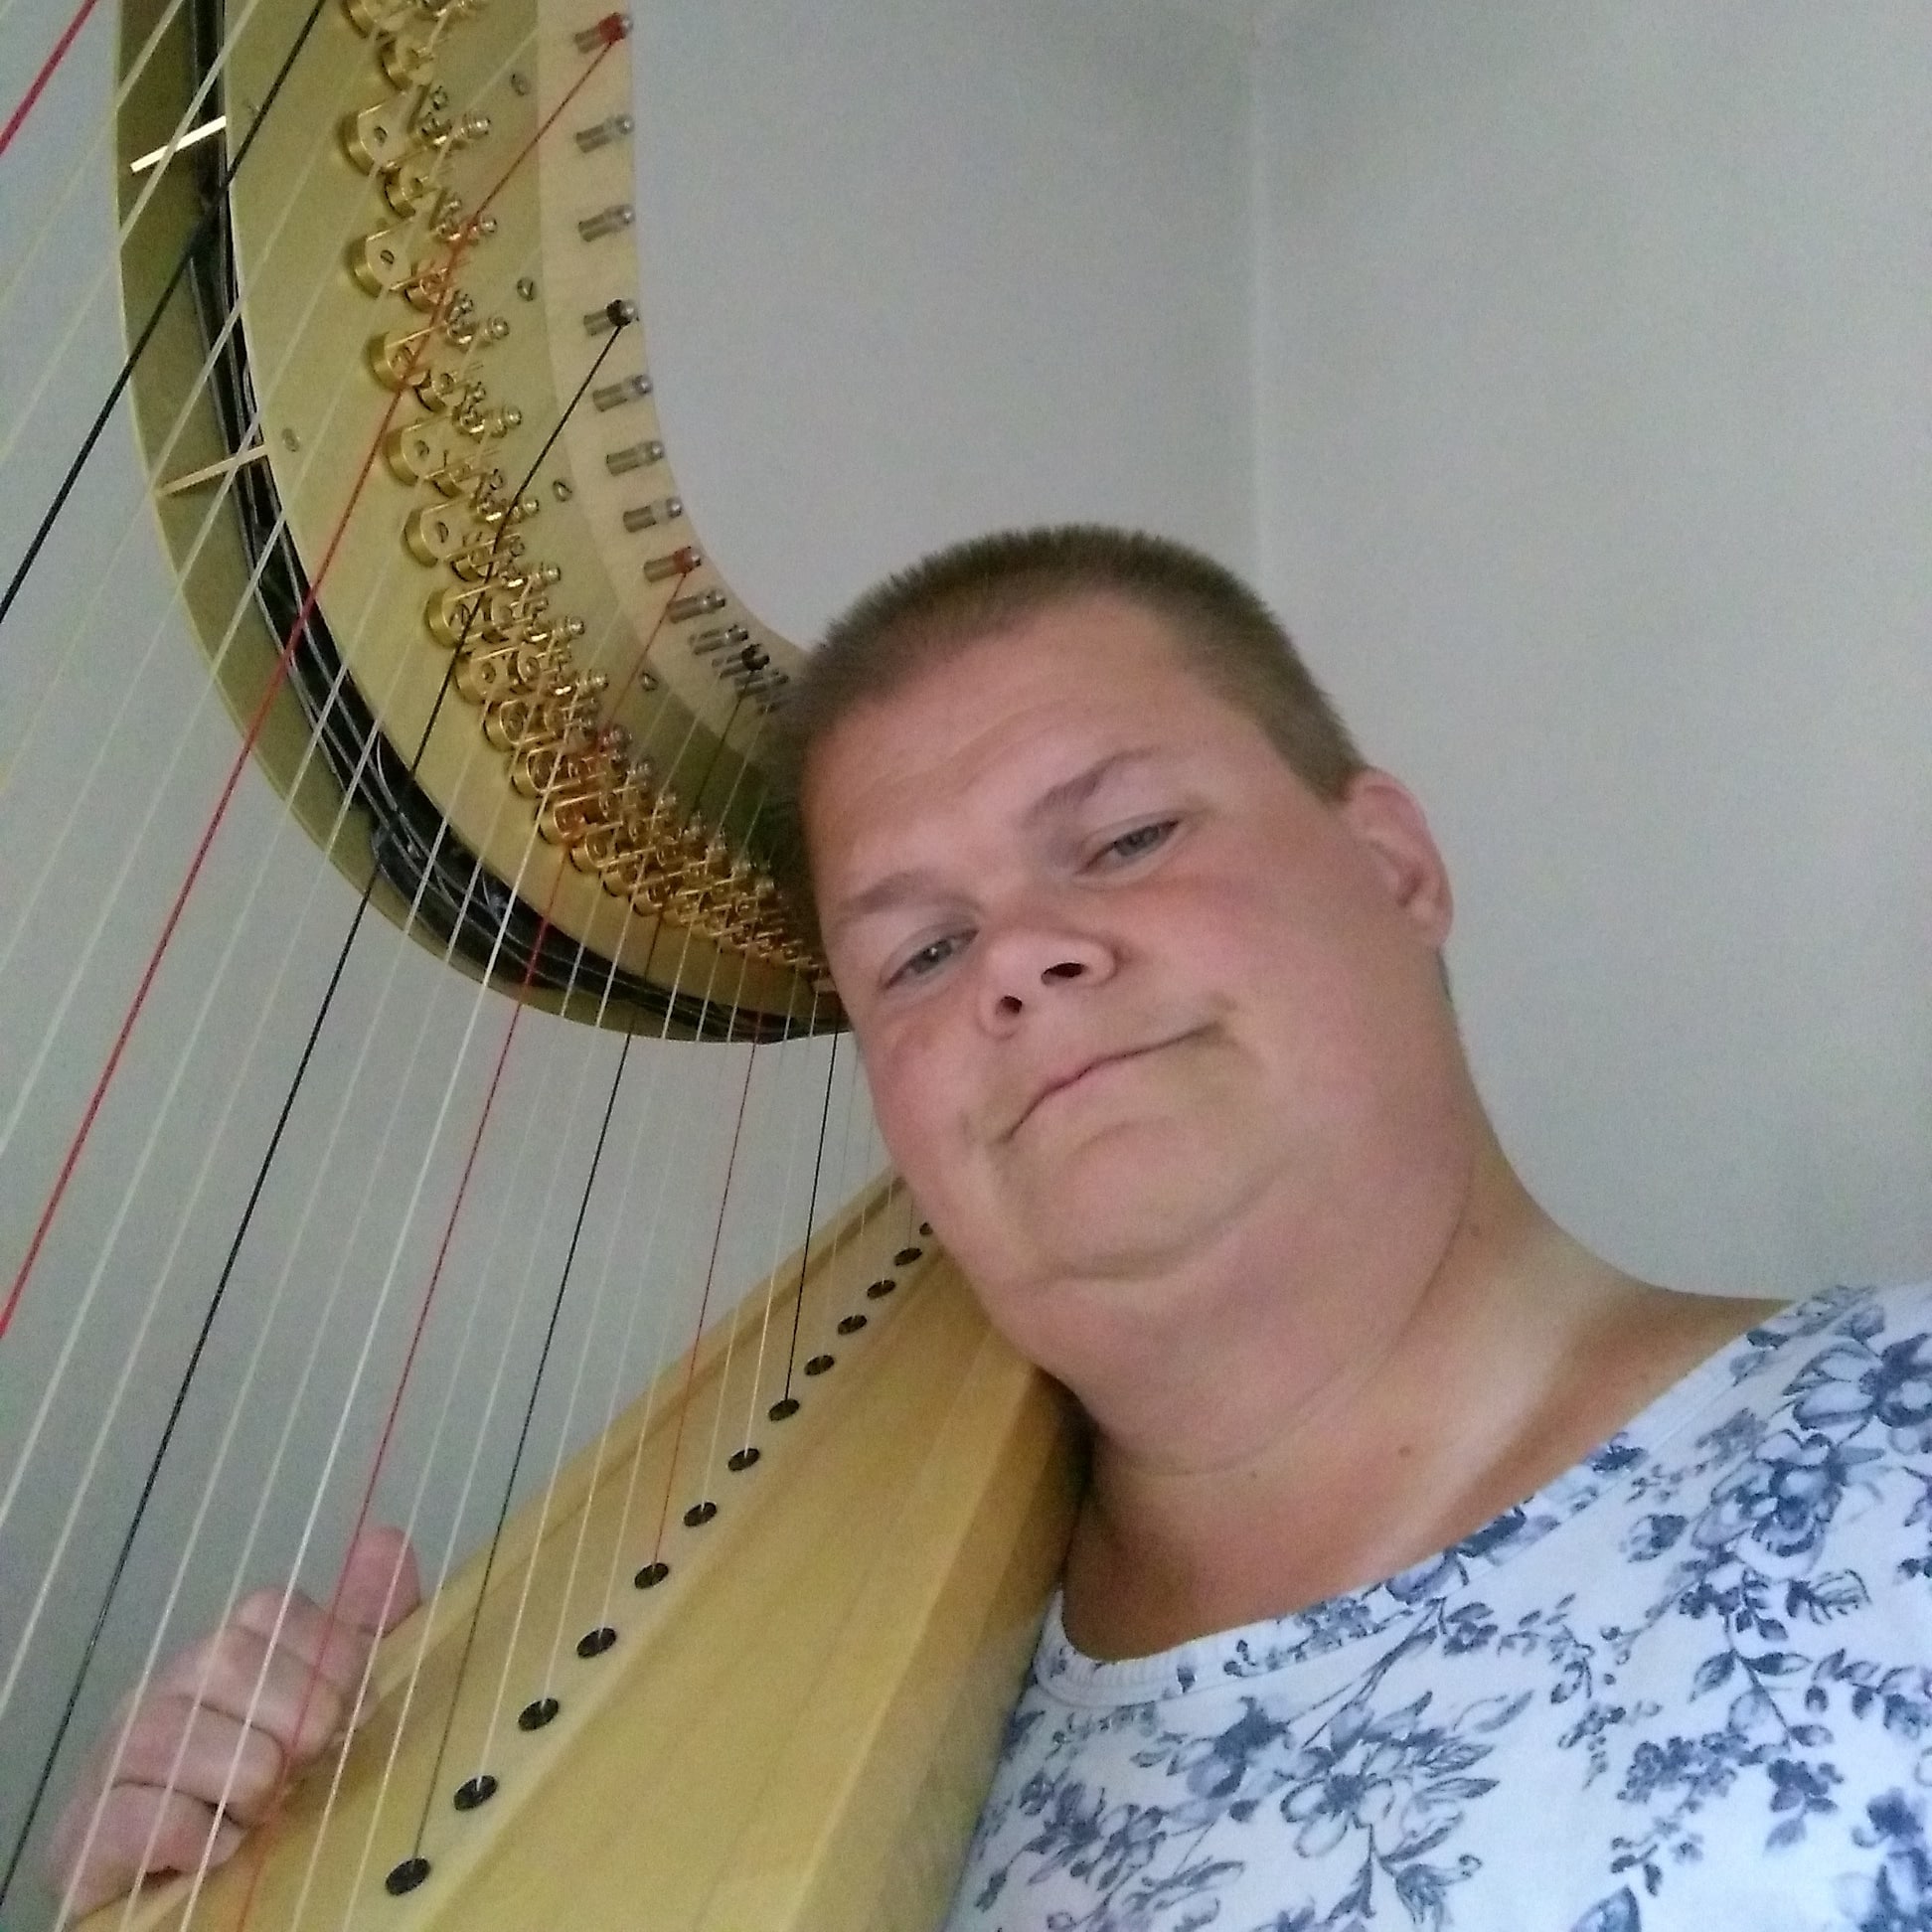 My own selfie showing me posing with Grover, my Camac Athena harp.